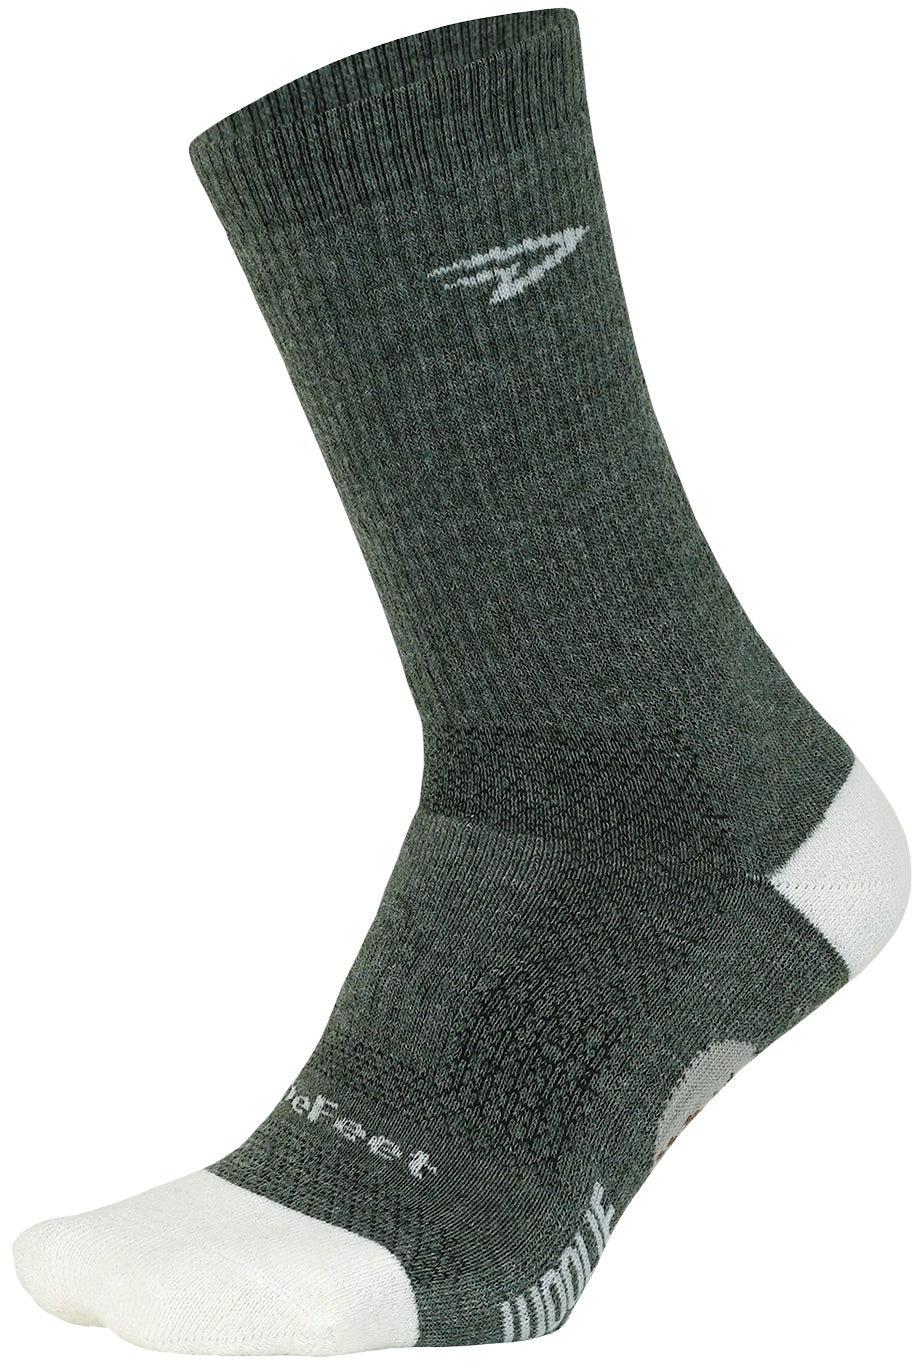 Image of Chaussette DeFeet Woolie Boolie Comp (15 cm environ) - Loden/Natural